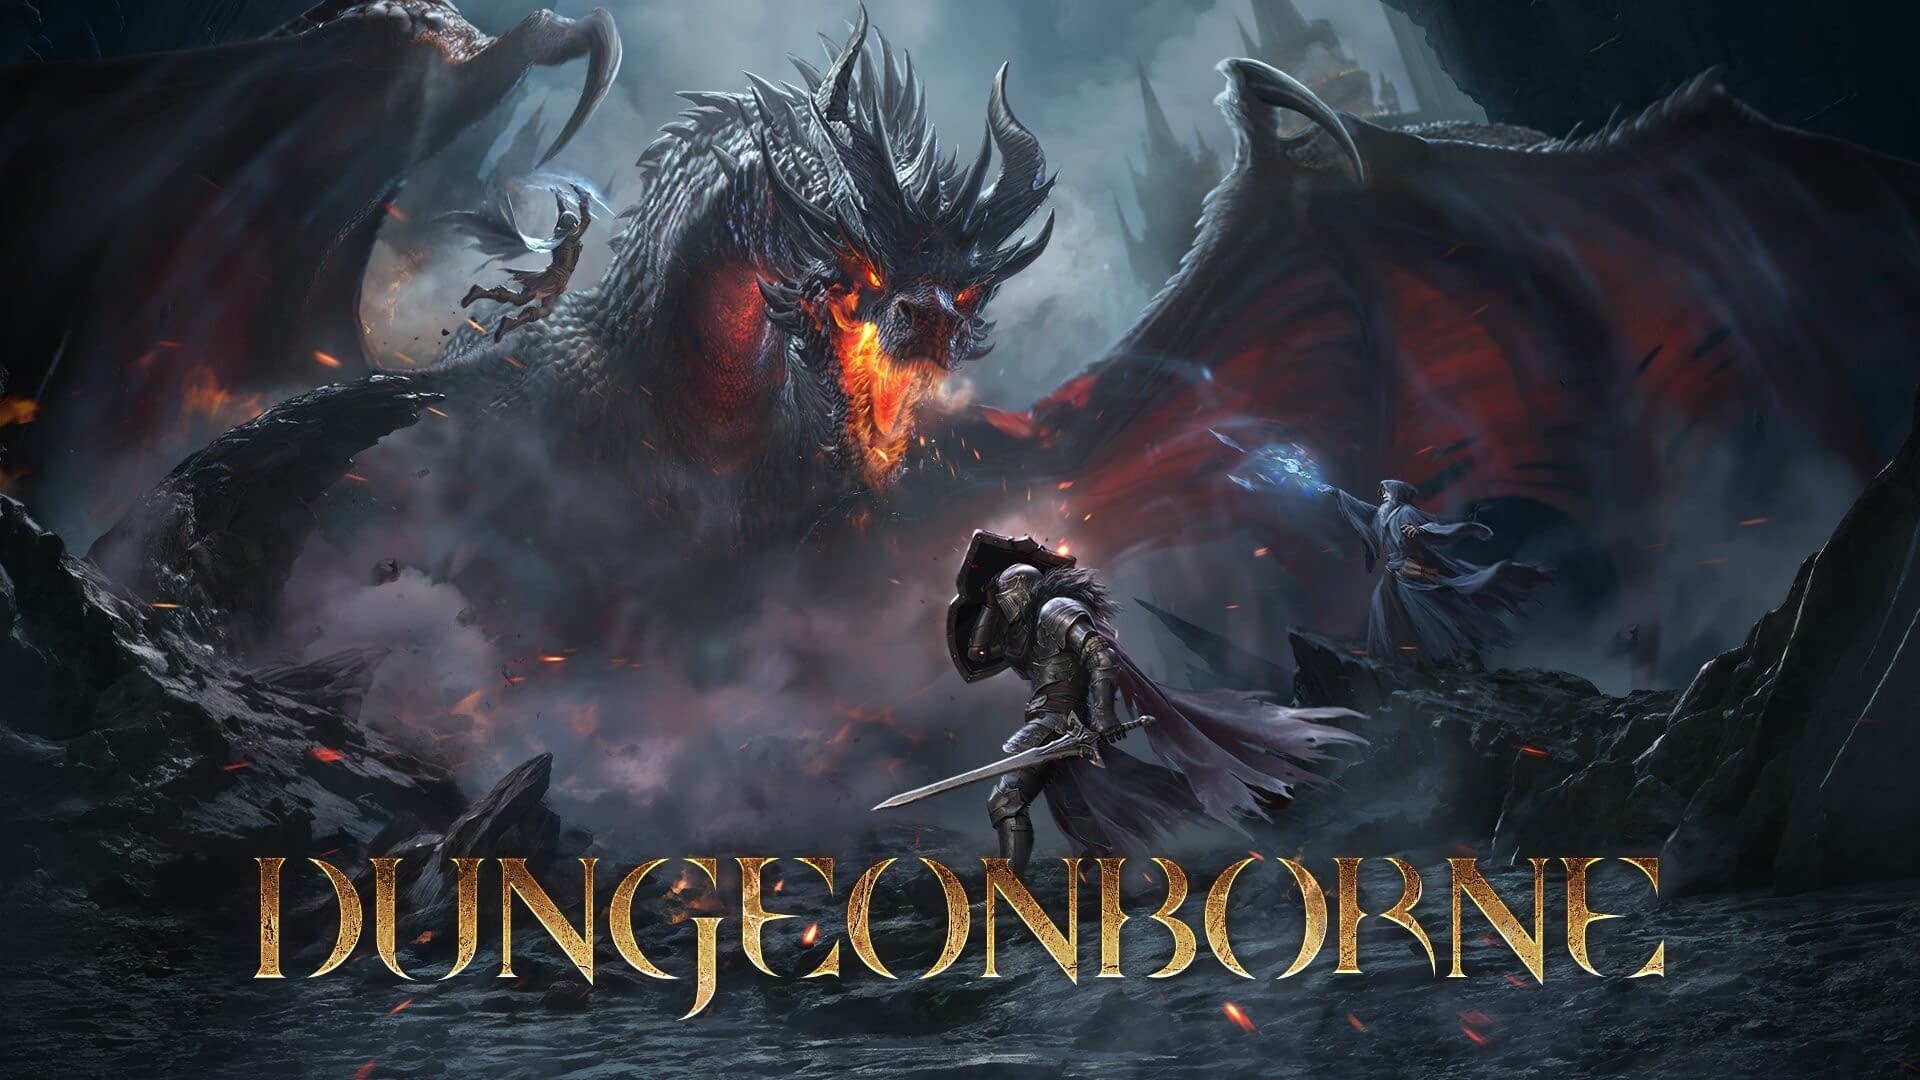 First Party Action Roleplay Game Dungeonborne Announcementl